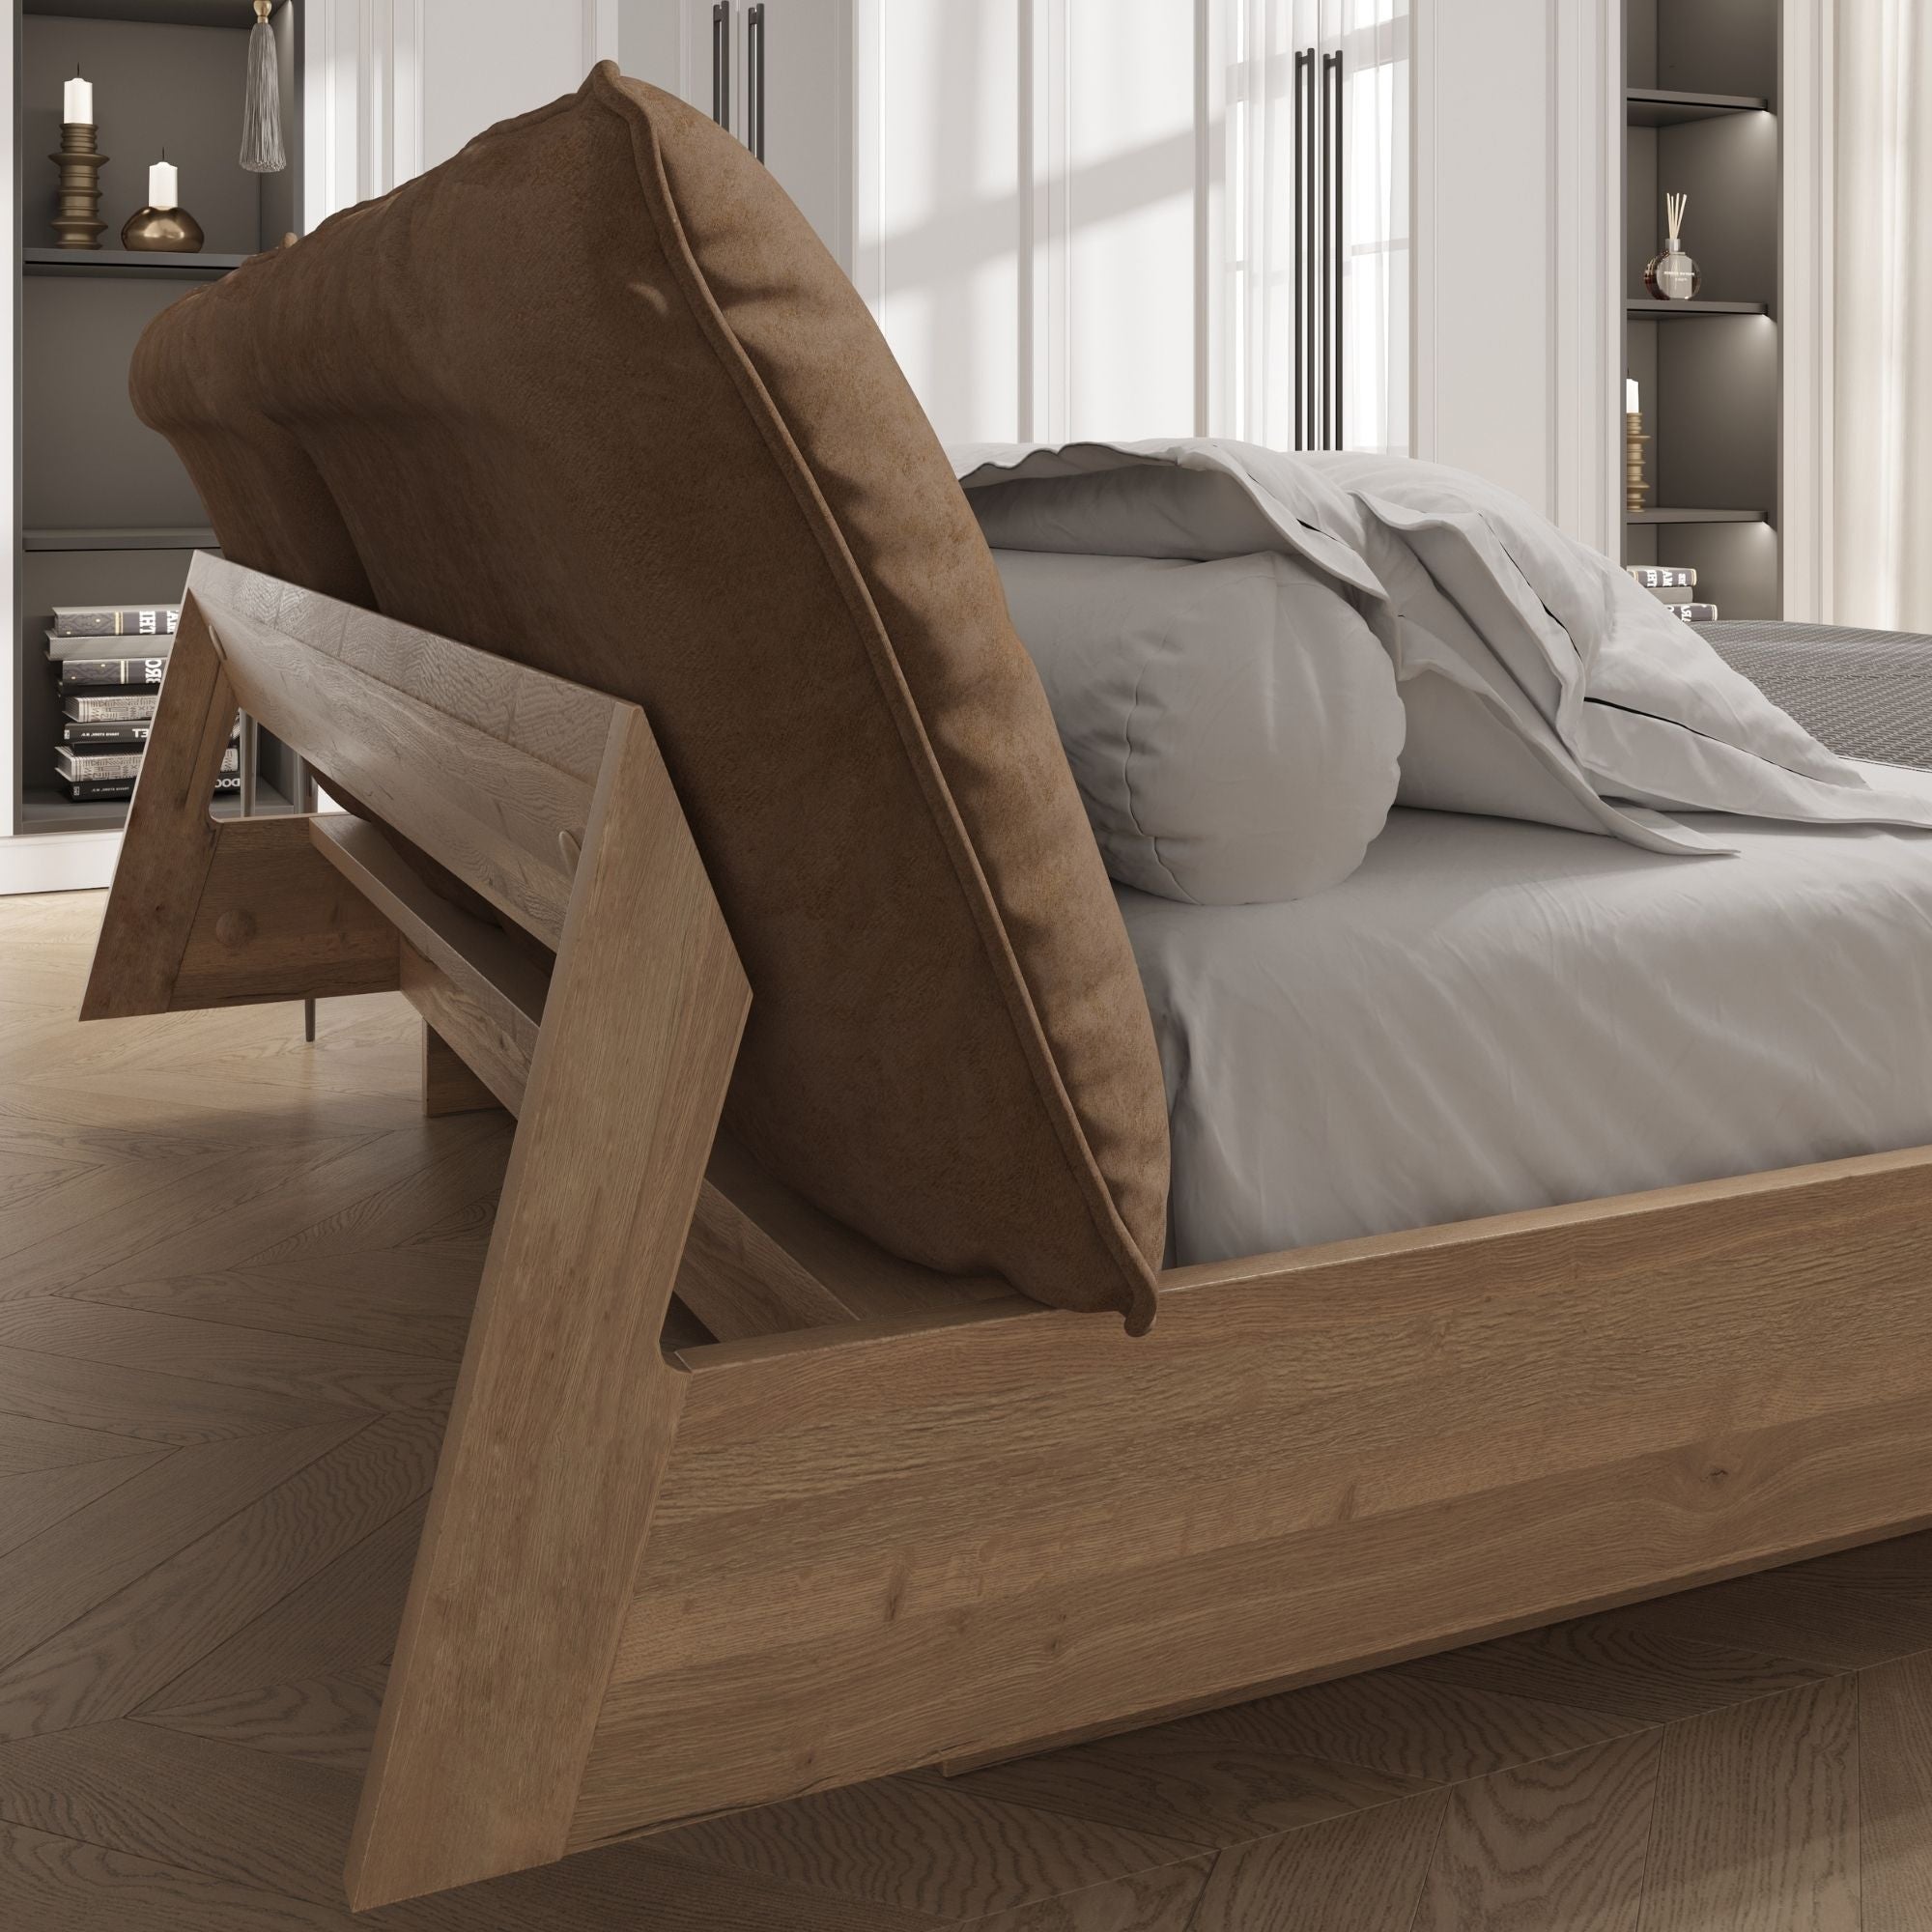 Ossi Bed - THAT COOL LIVING